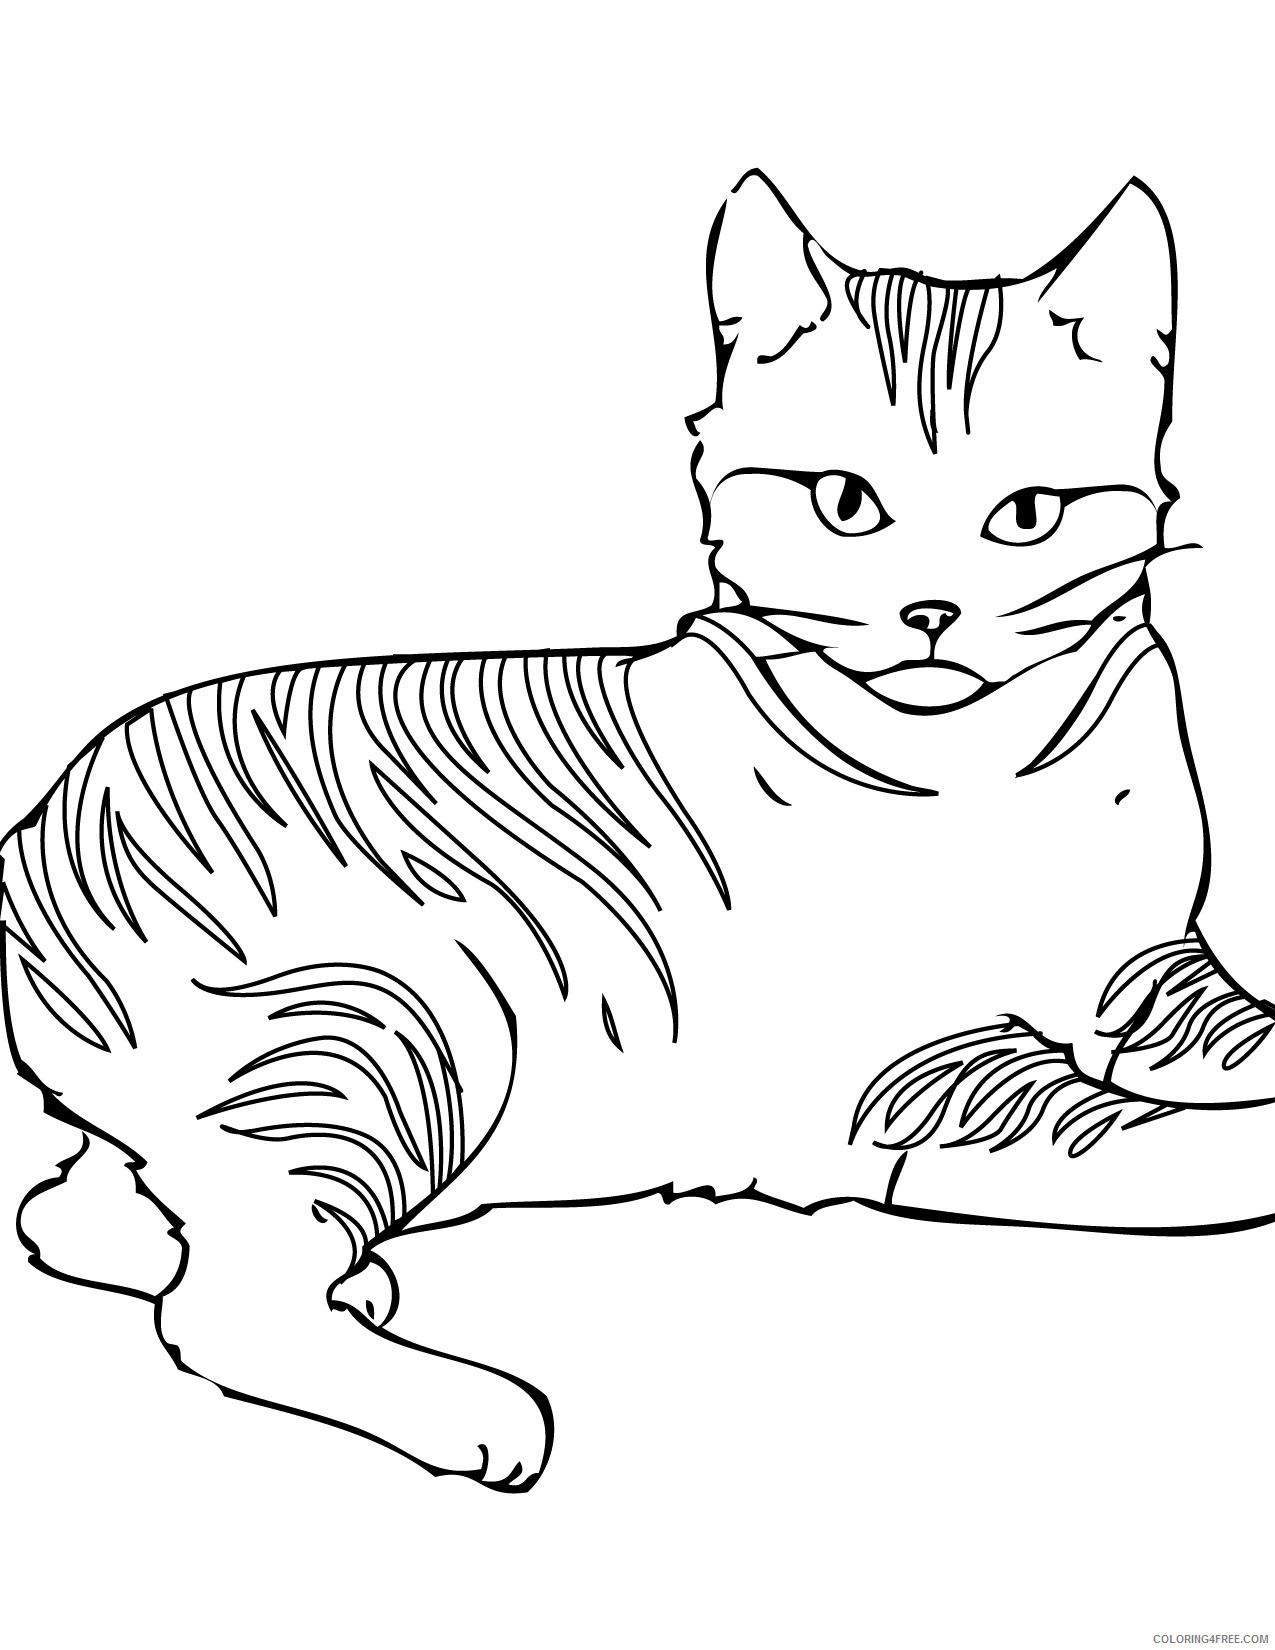 Warrior Cats Coloring Pages Cartoons Warrior Cat Printable 2020 6886 Coloring4free